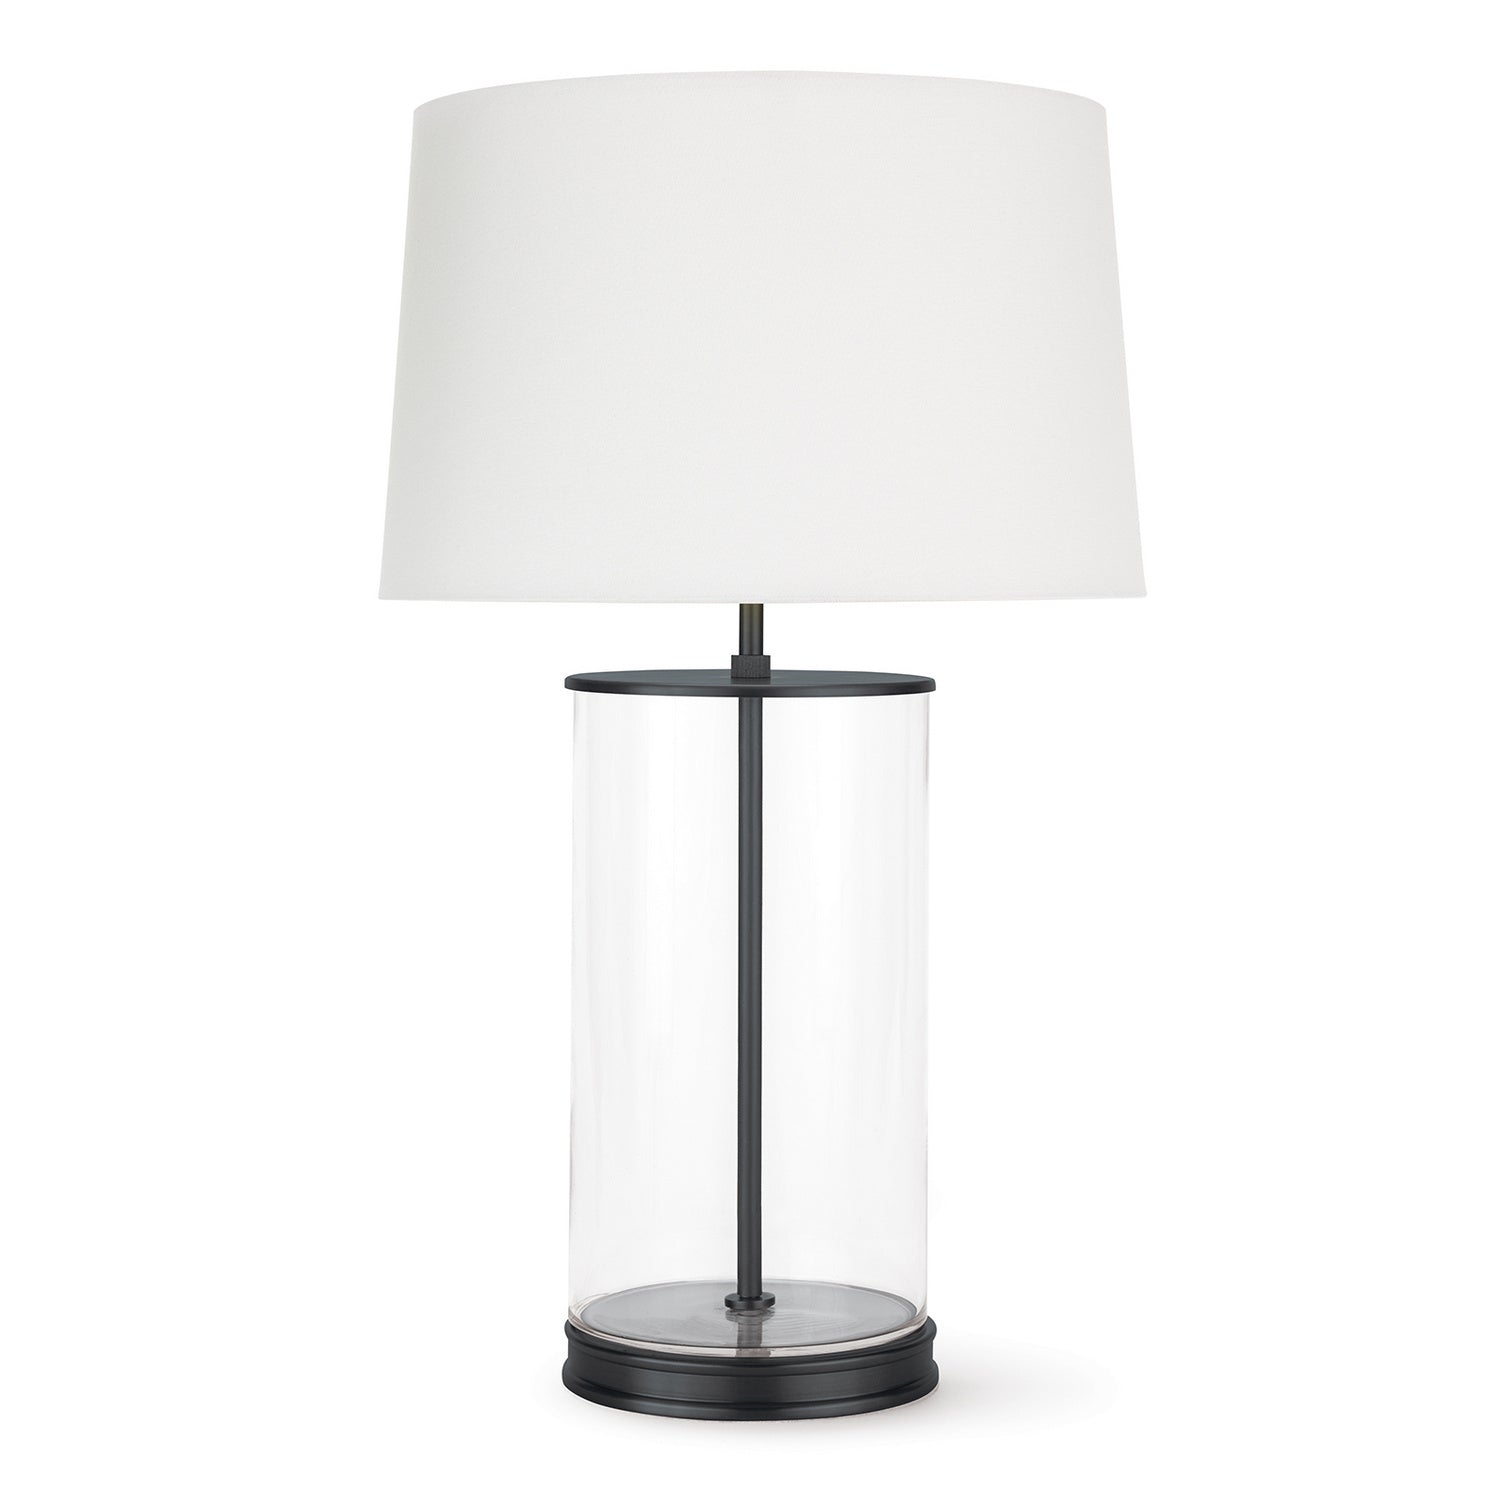 Regina Andrew - 13-1438ORB - One Light Table Lamp - Magelian - Clear